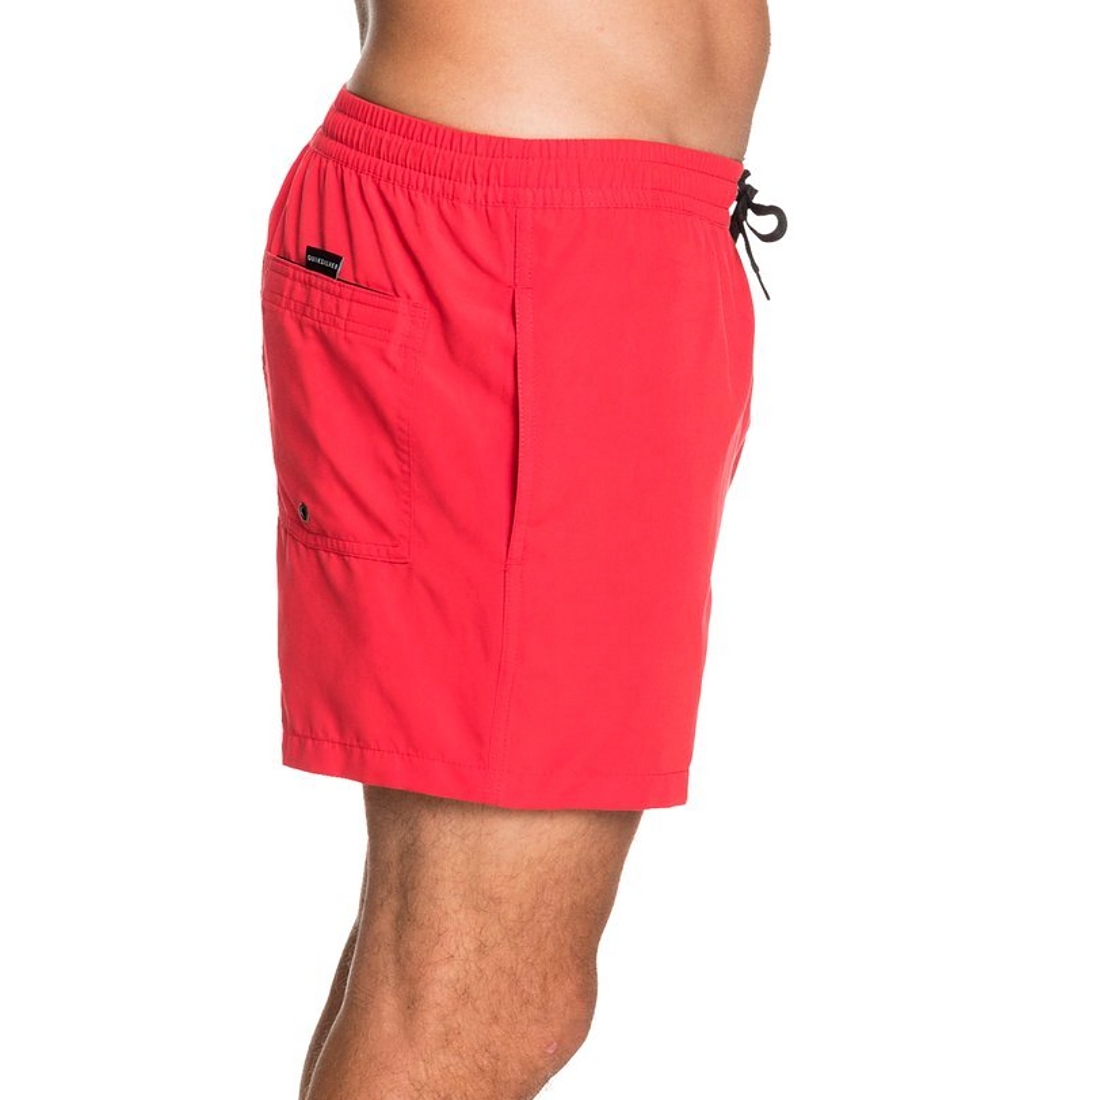 MaillotShort homme Quiksilver  Bright Red V03531  rqco